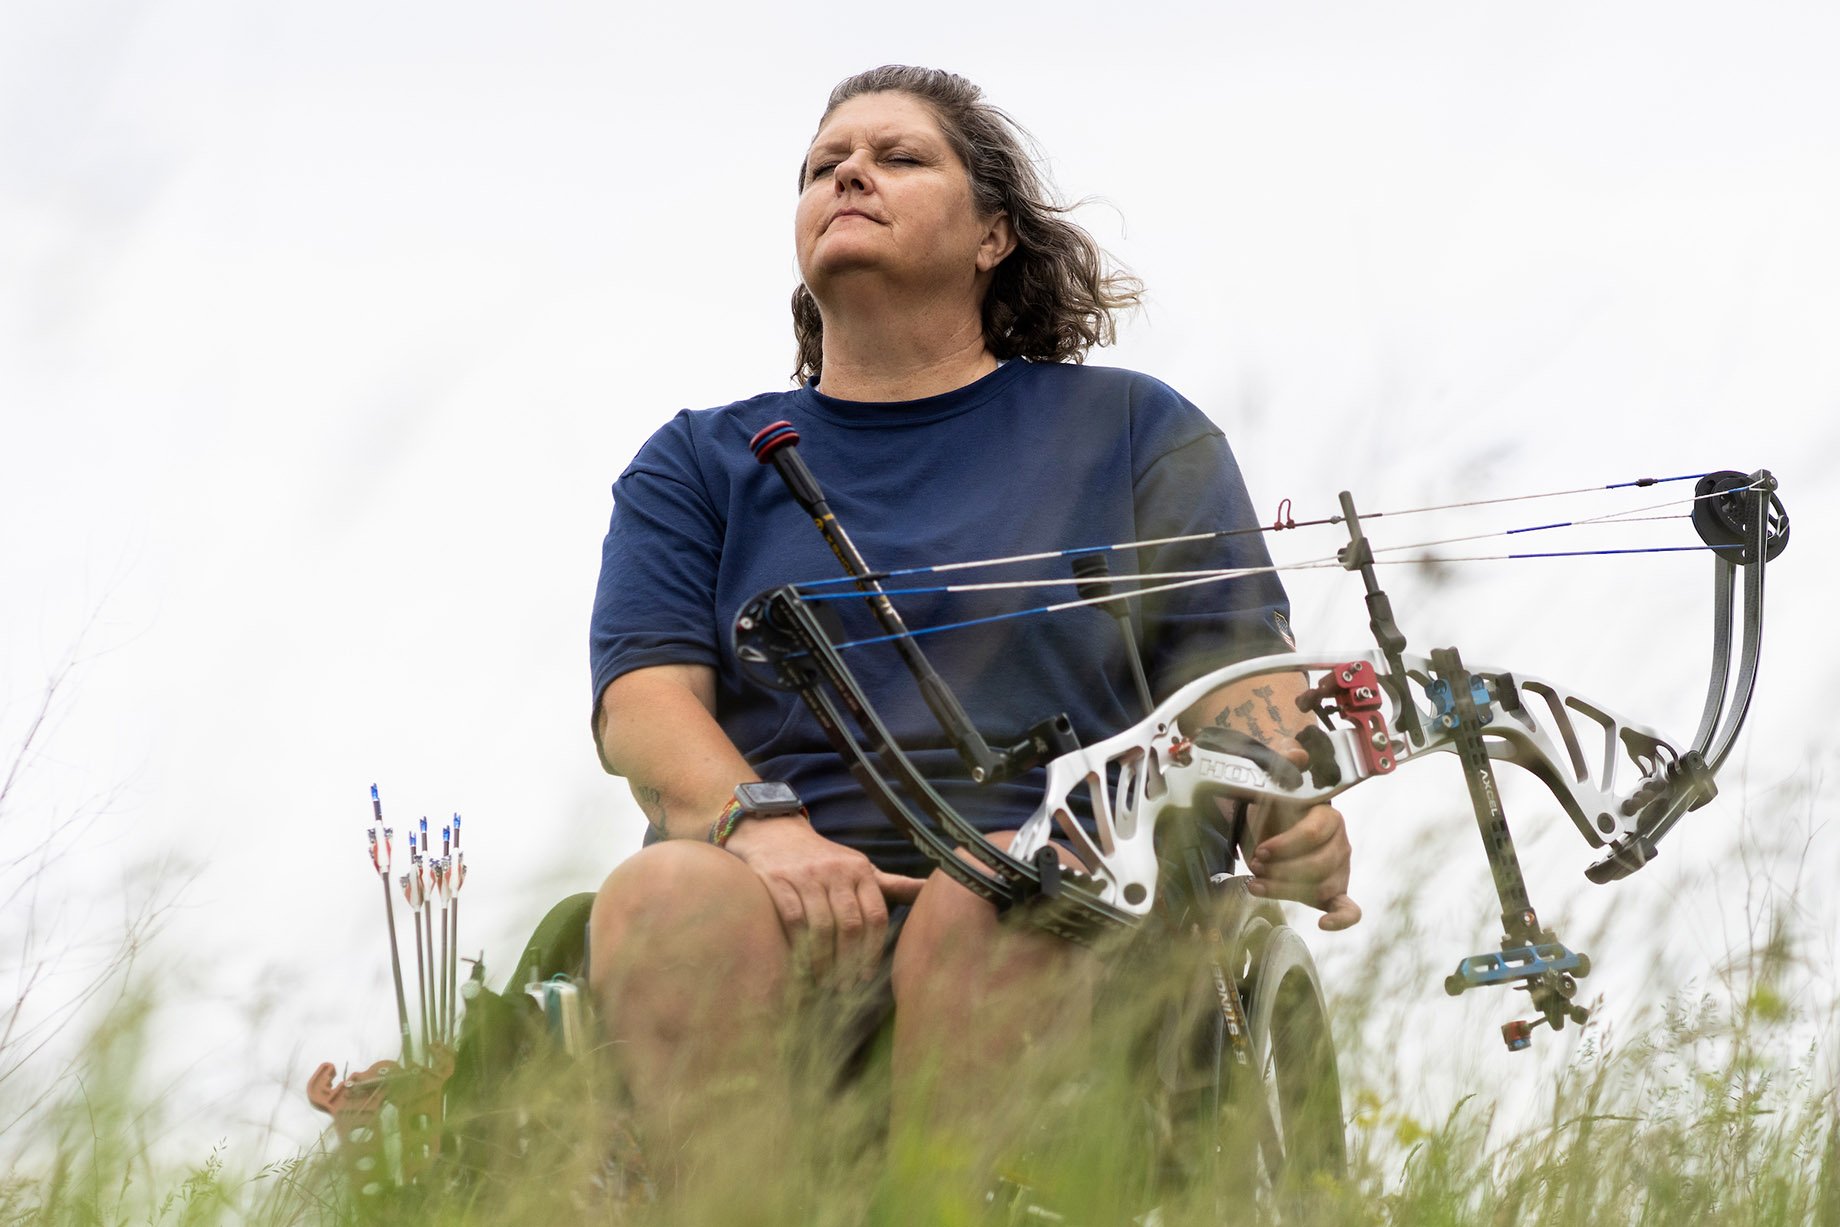 Lia Coryell holding archery arrow in field shot by Lauren Justice for the New York Times